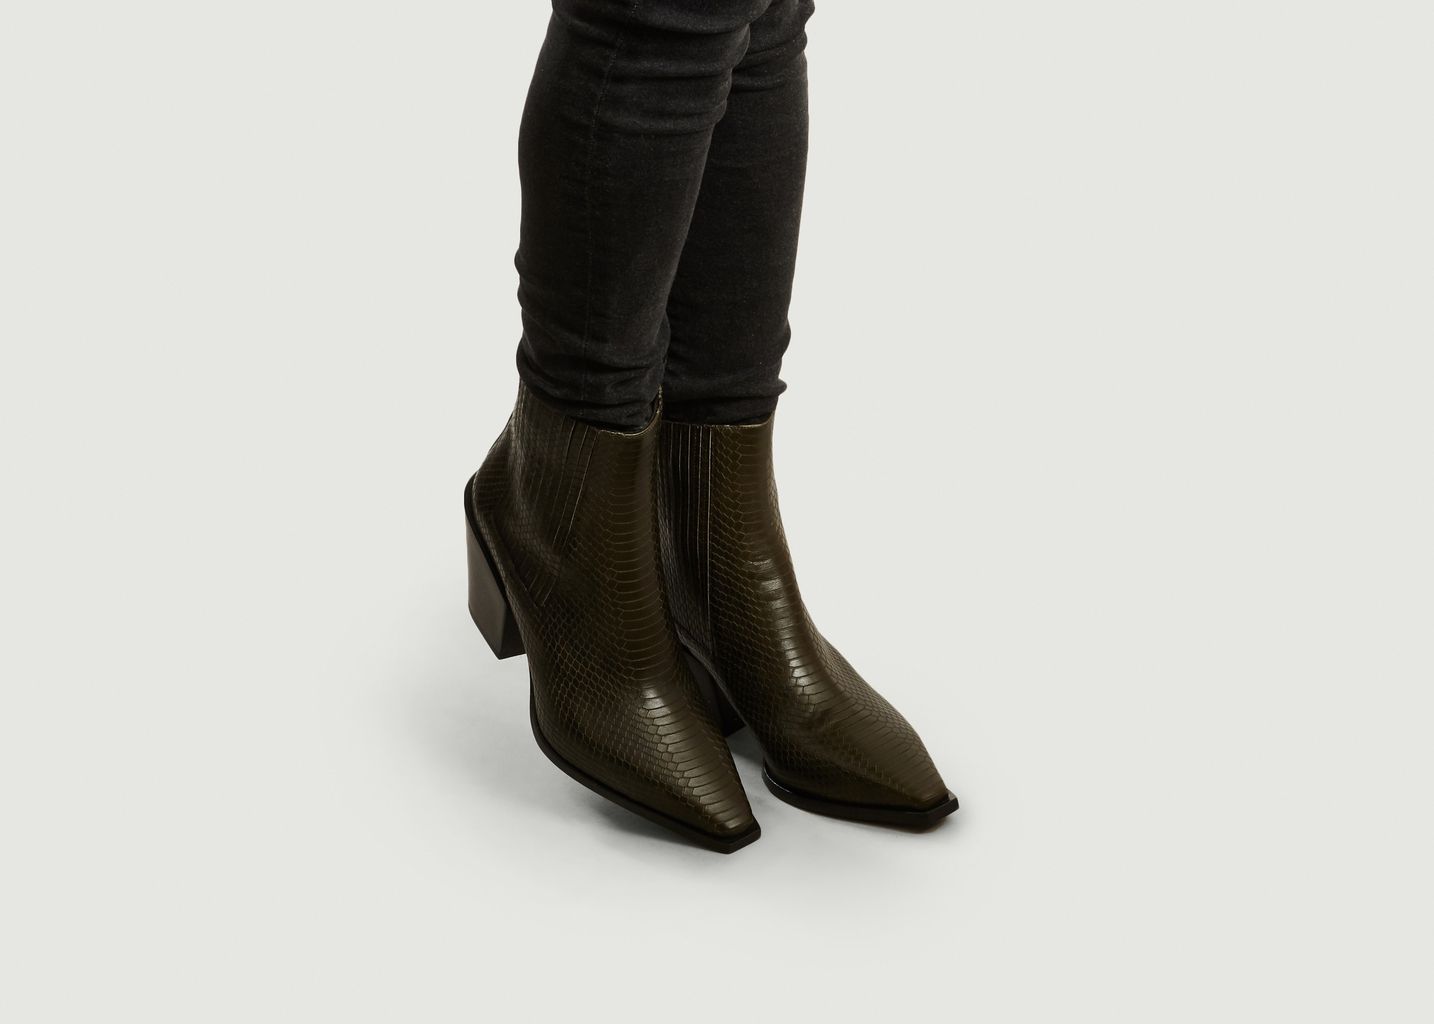 aeyde kate boots